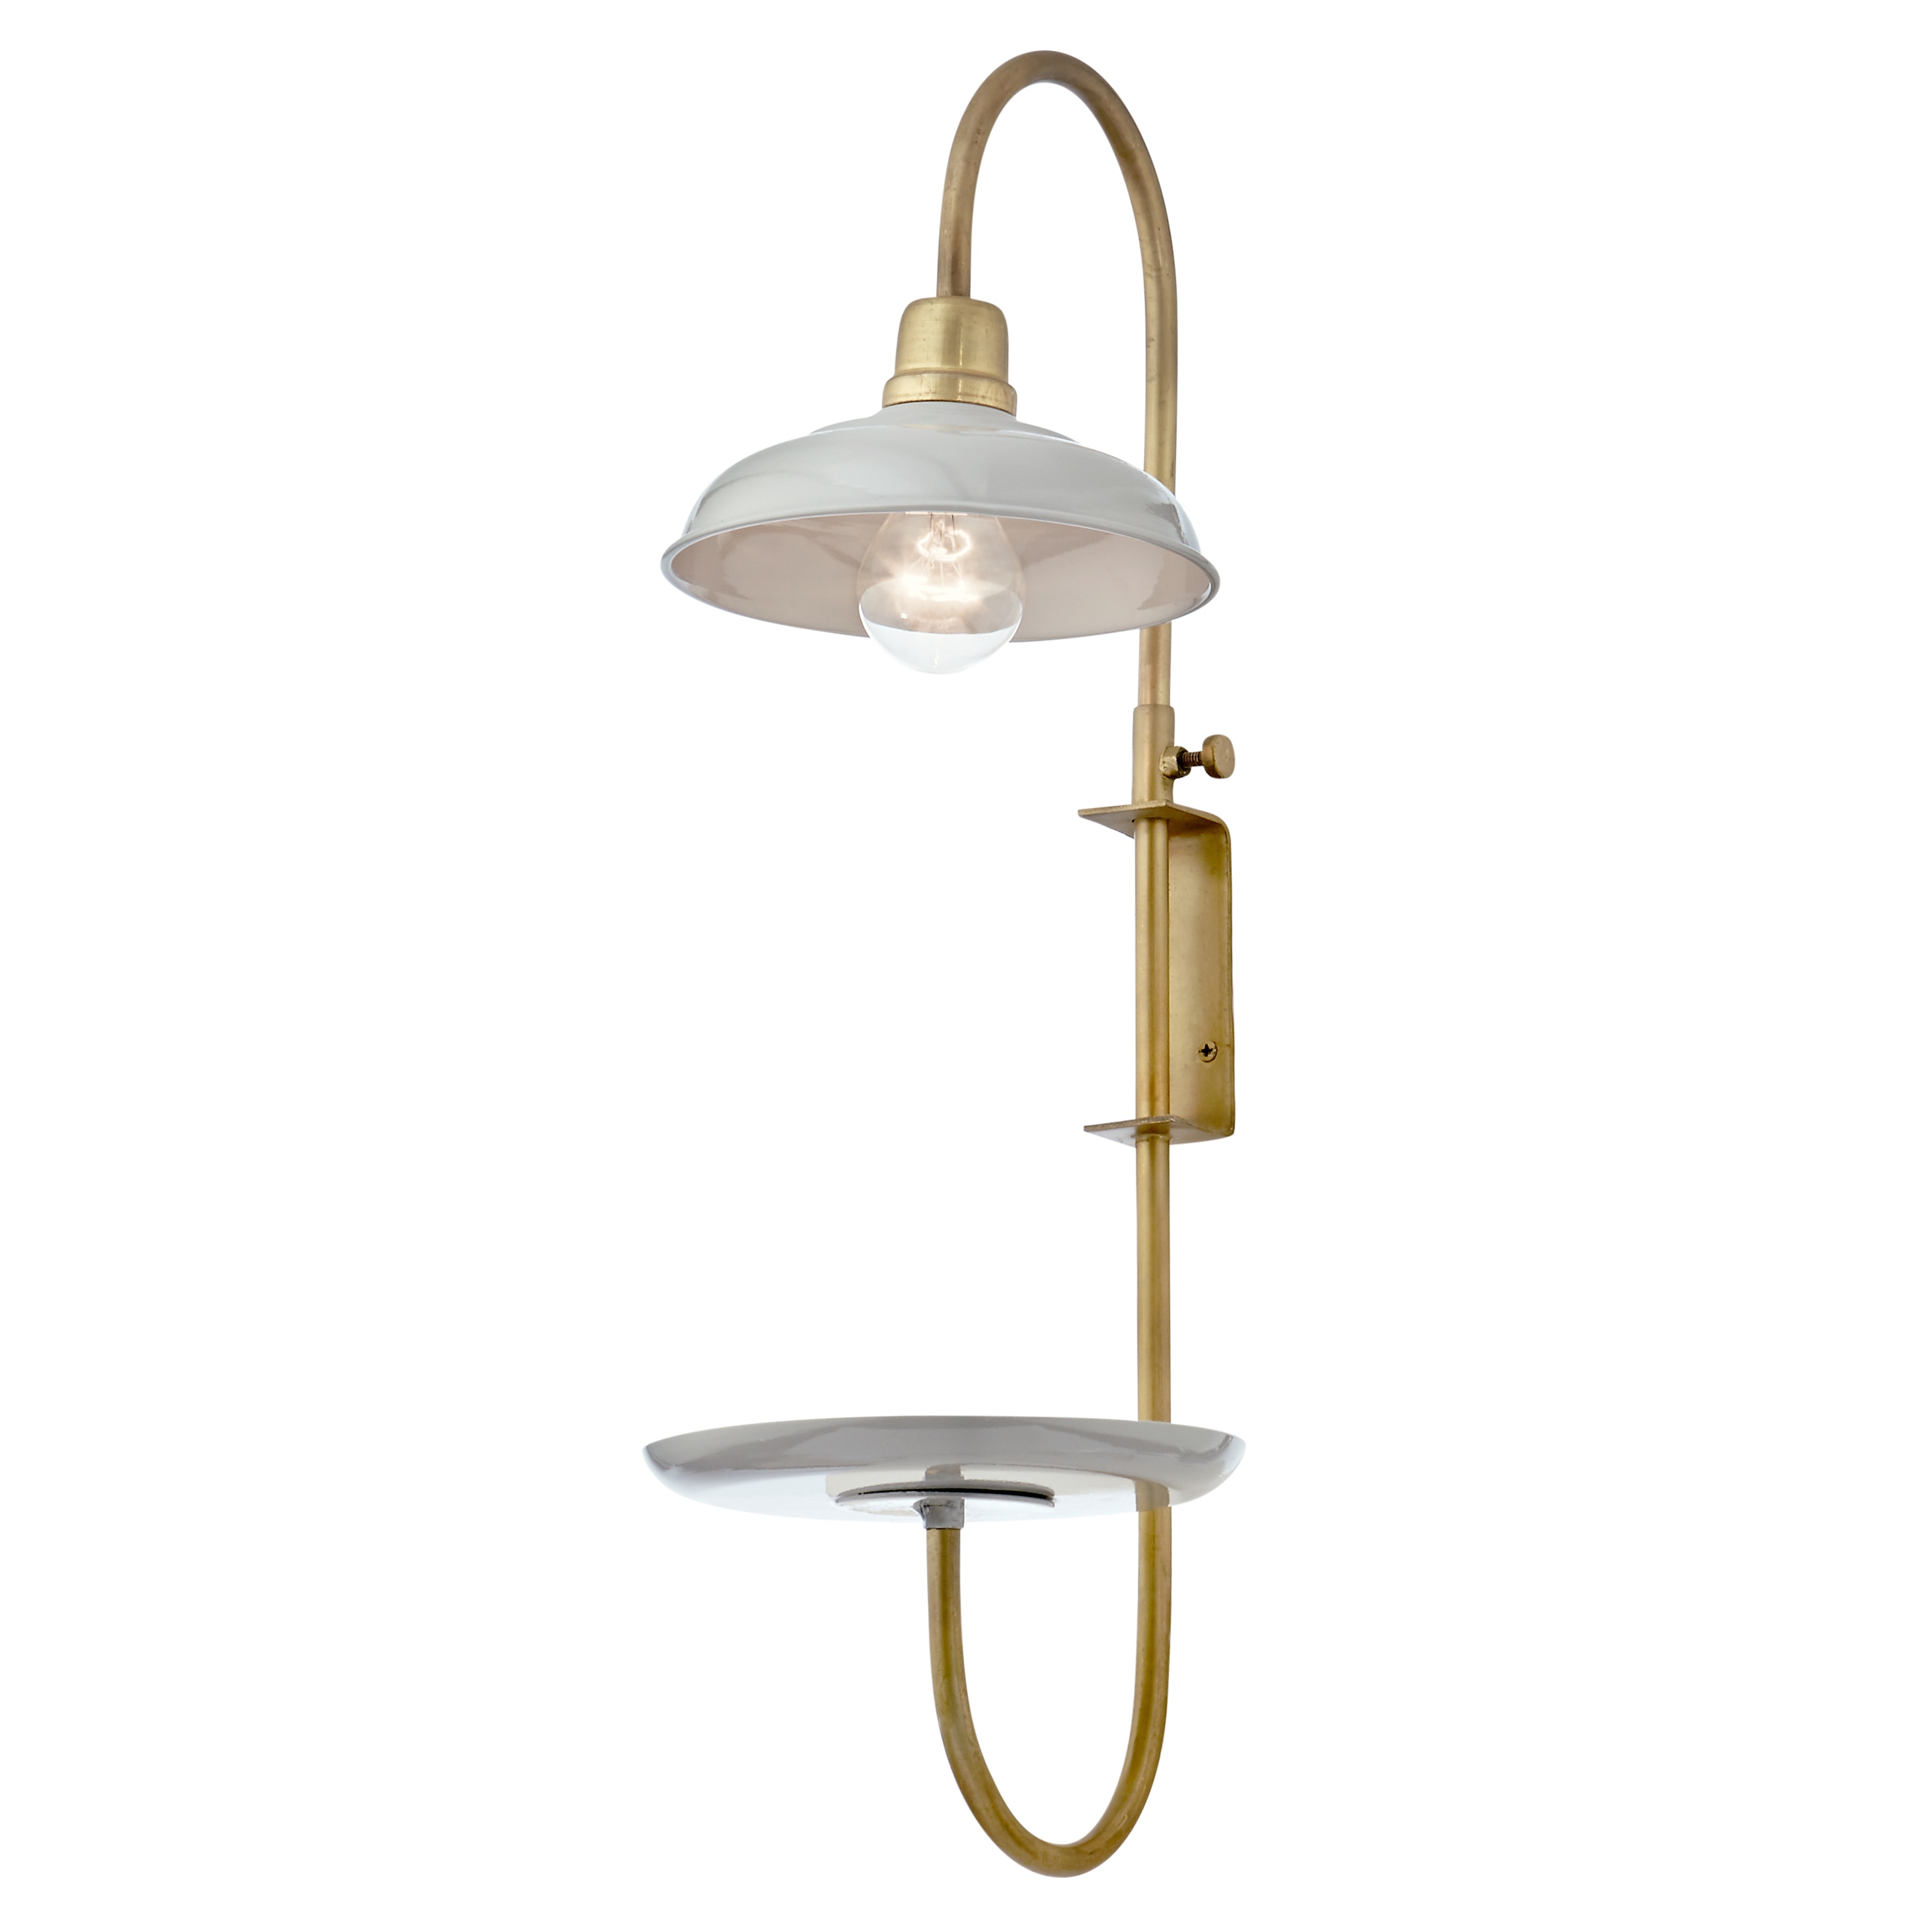 NEW~Beautiful Wall Sconce by TOV in Blush~KULI Contemporary Modern~Brass Accent 